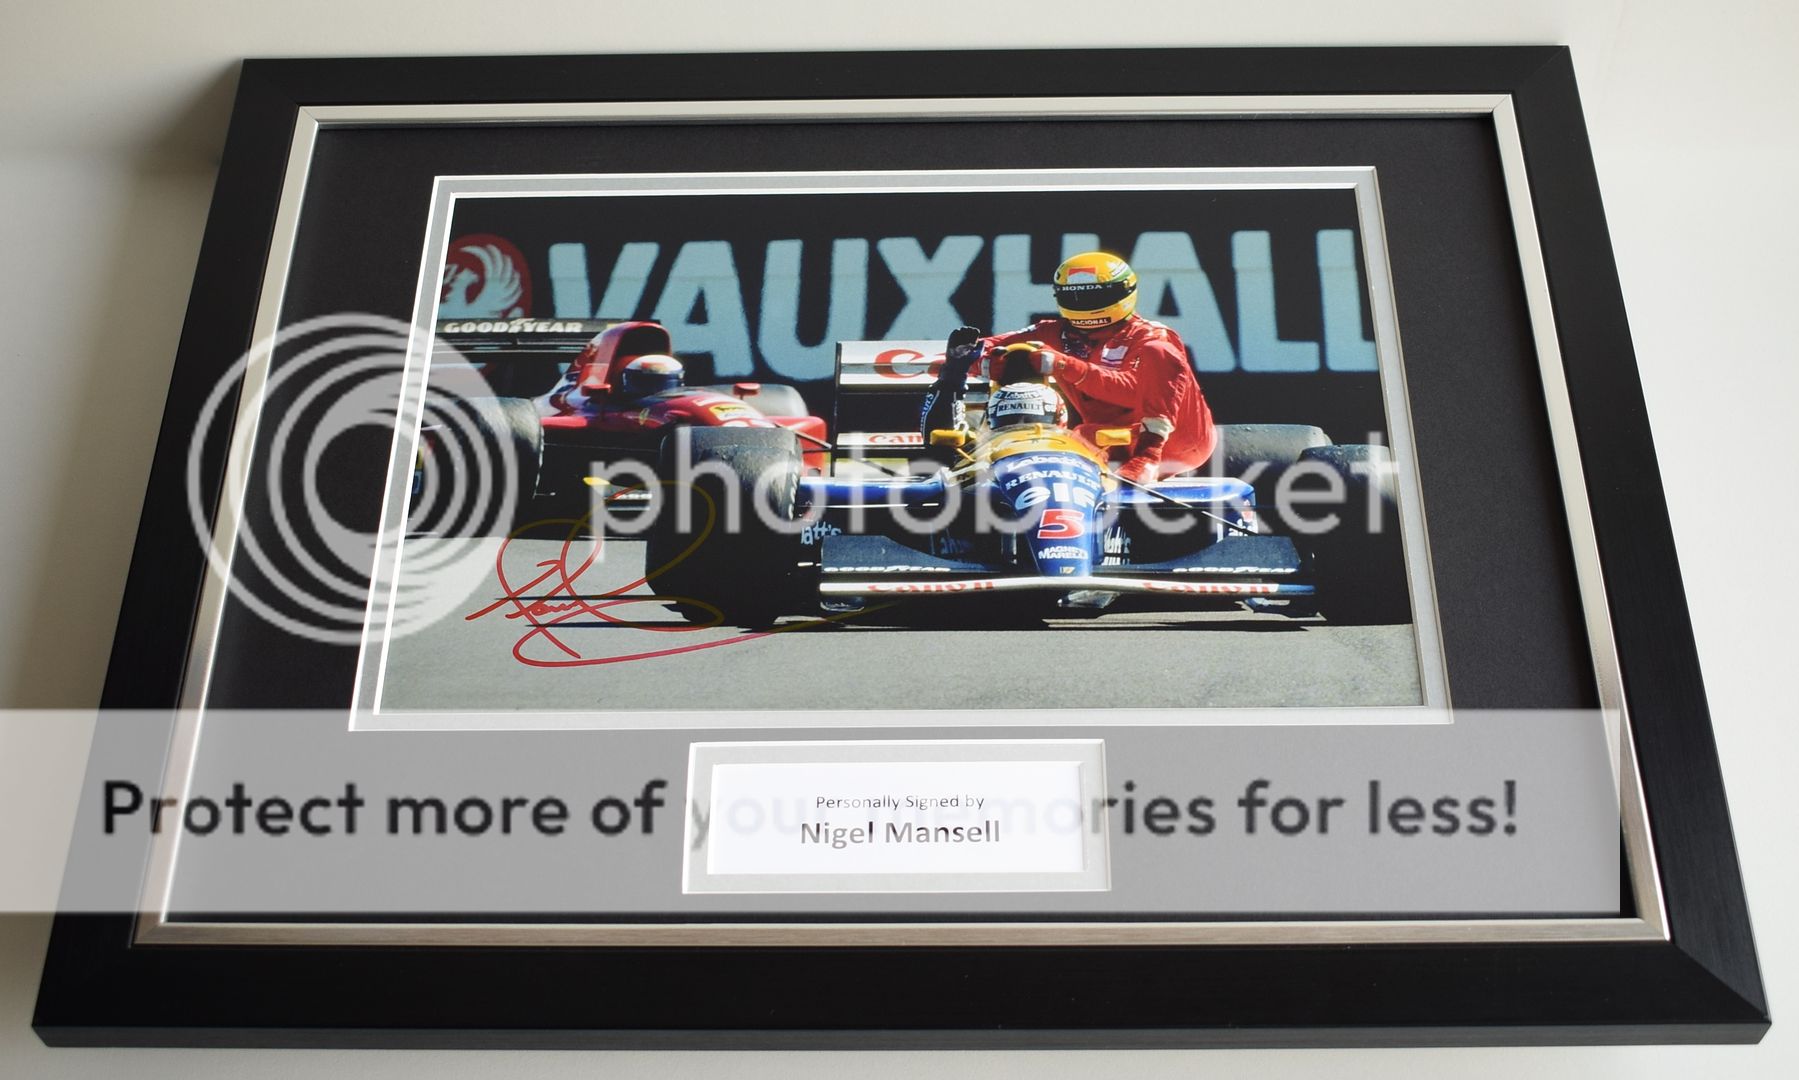 Signature Photo Wall Art A4 SILVER FRAMED NIKI LAUDA GRAND PRIX CAR Signed by Autographed Poster Print Autograph Image GIFT